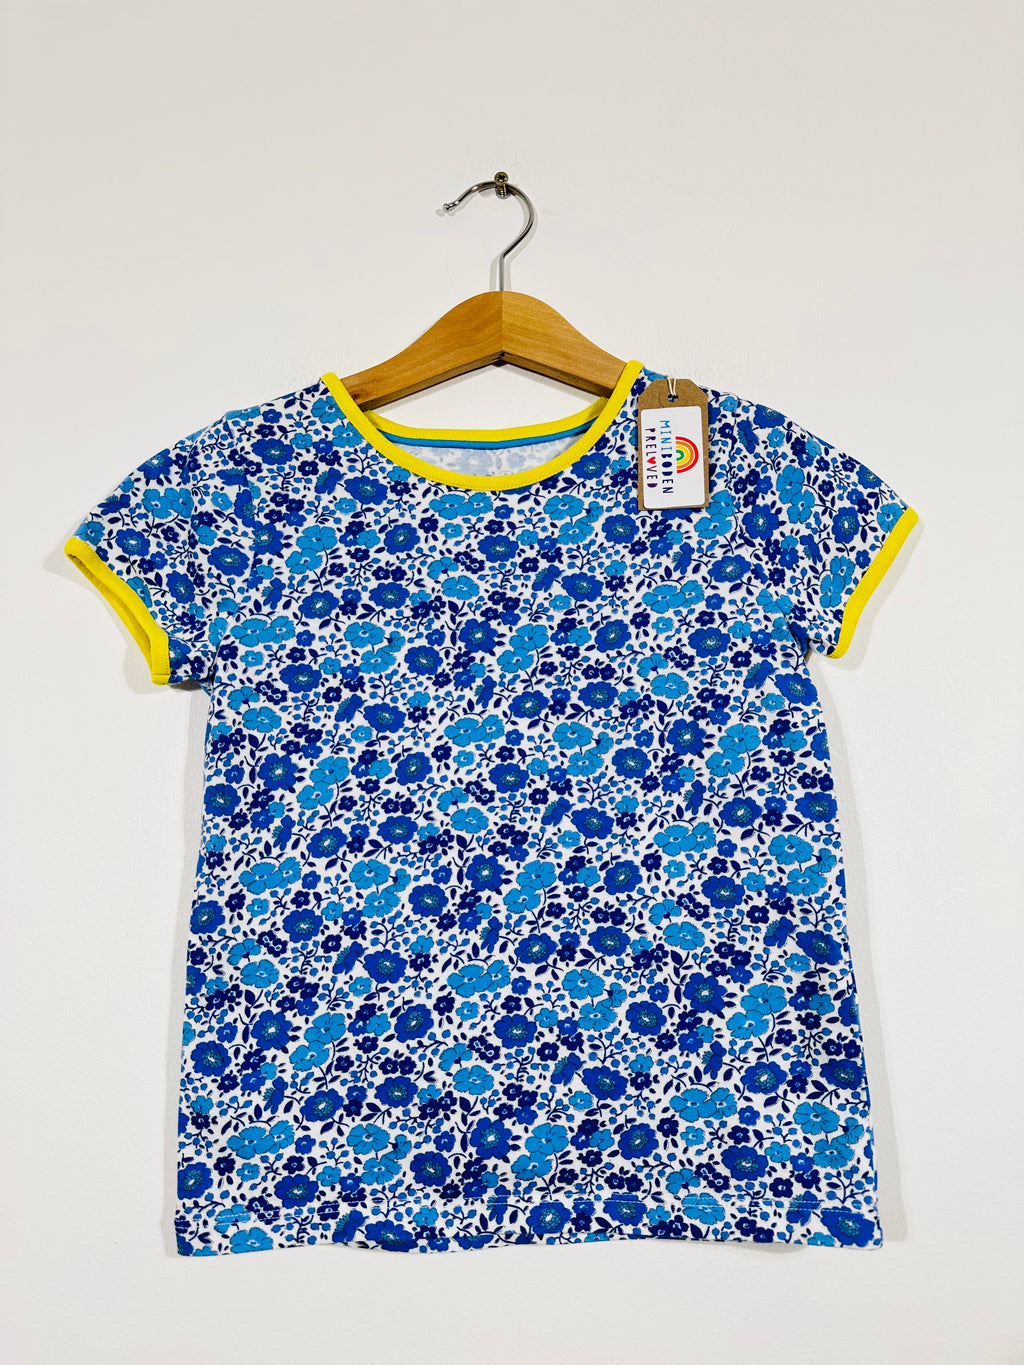 Blue Floral Liberty Patterned Top (3-4 Years)